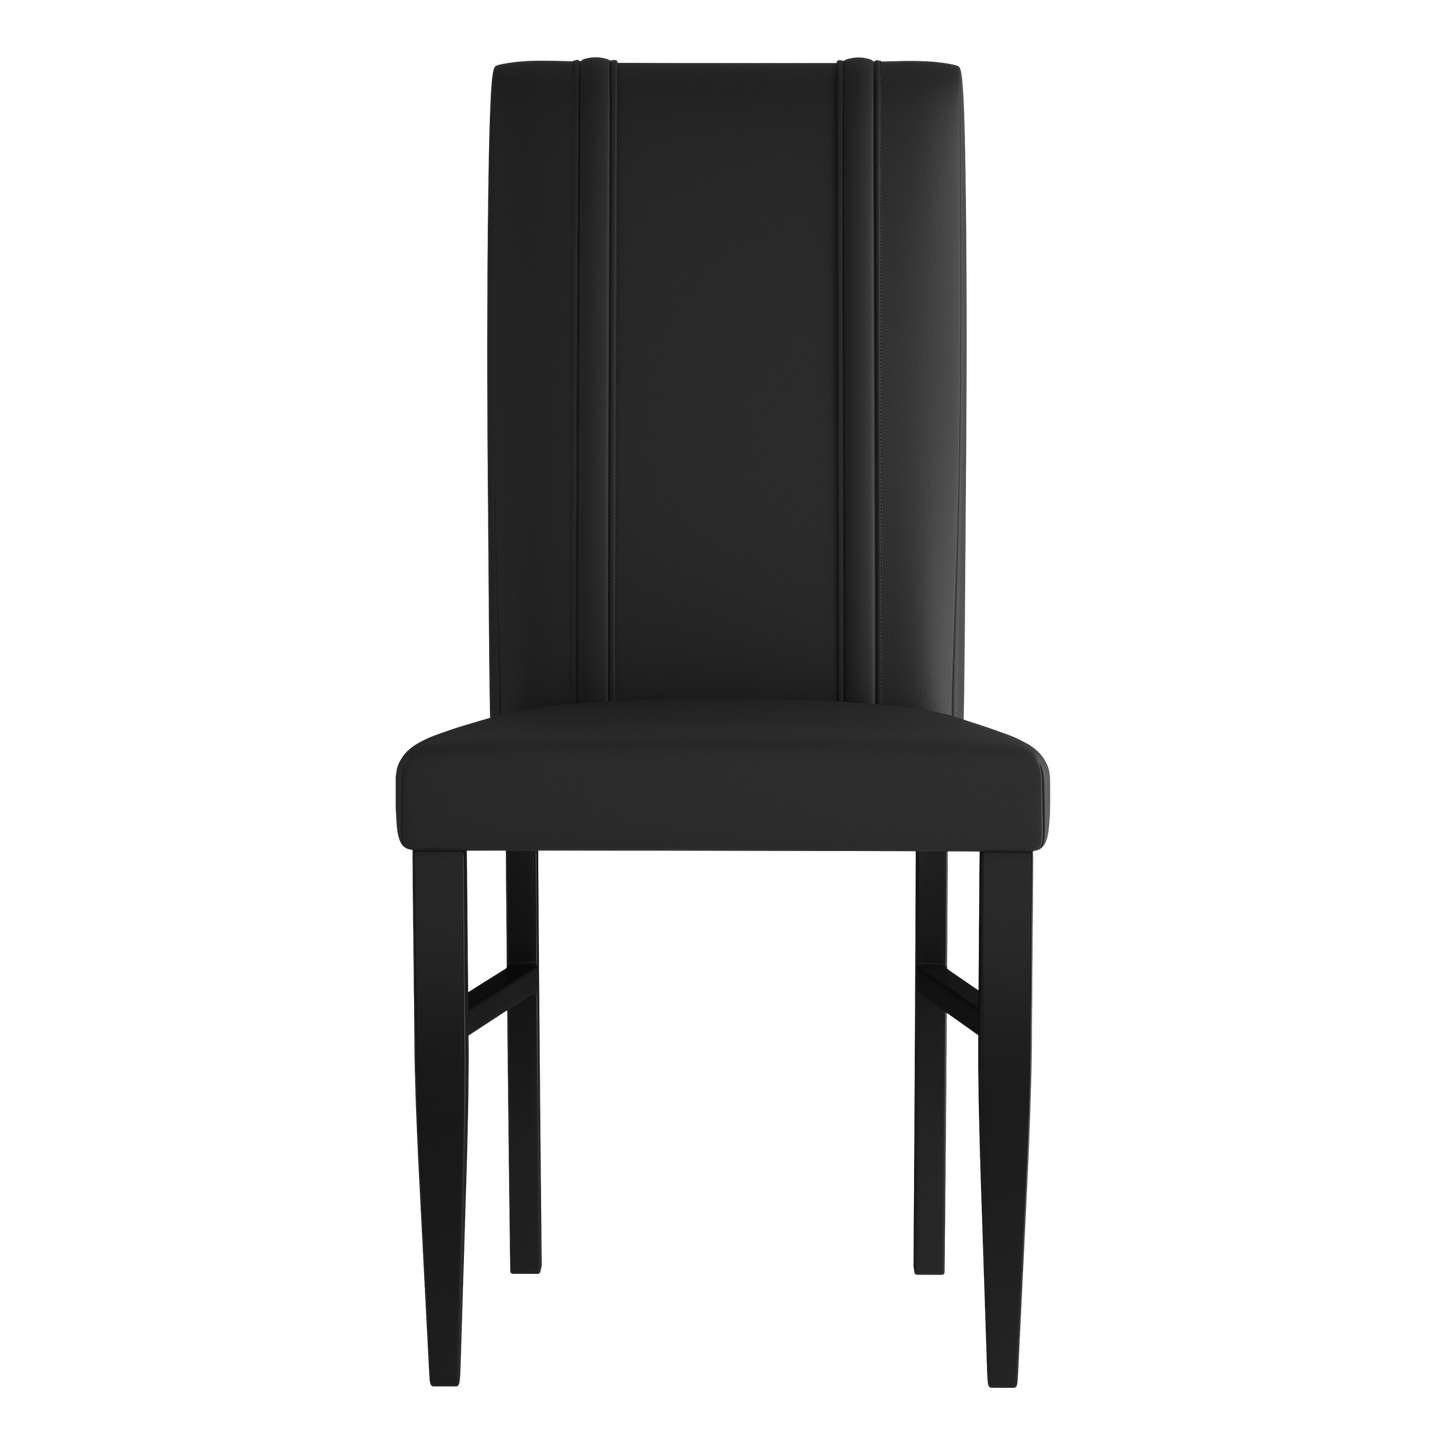 Side Chair 2000 with Nashville SC Secondary Logo Set of 2